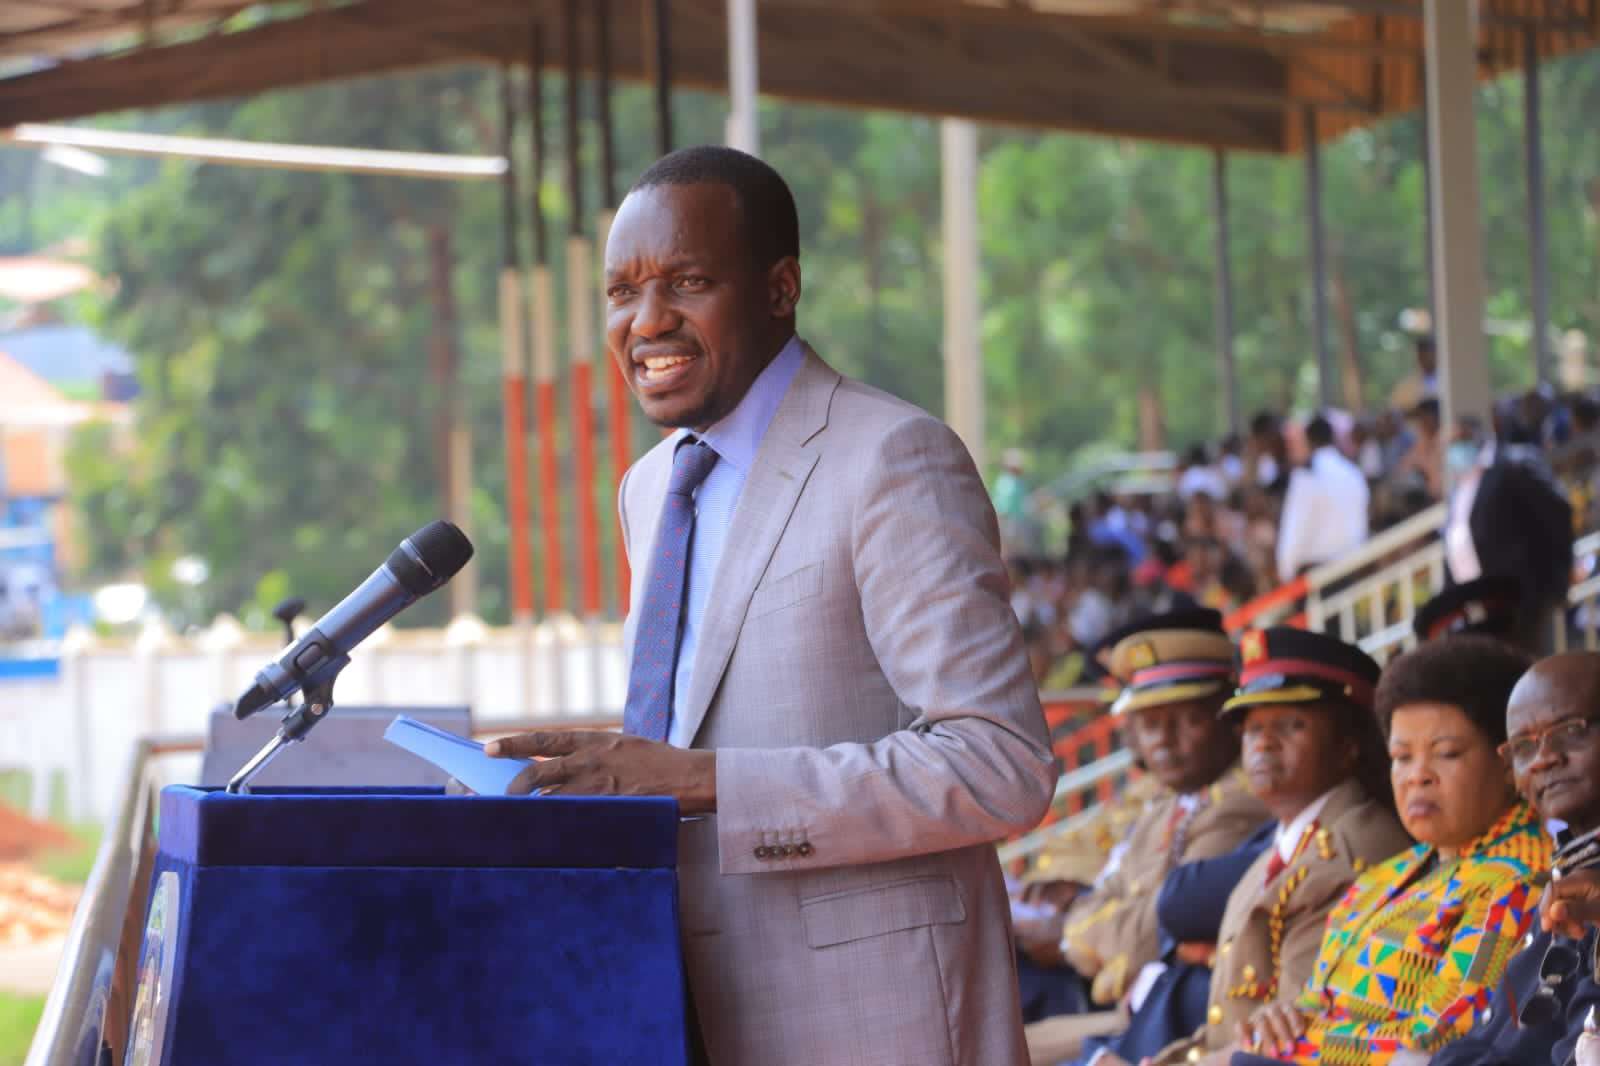 "If you did not vote you'll not get any bursaries" - Simba Arati tells Kisii residents